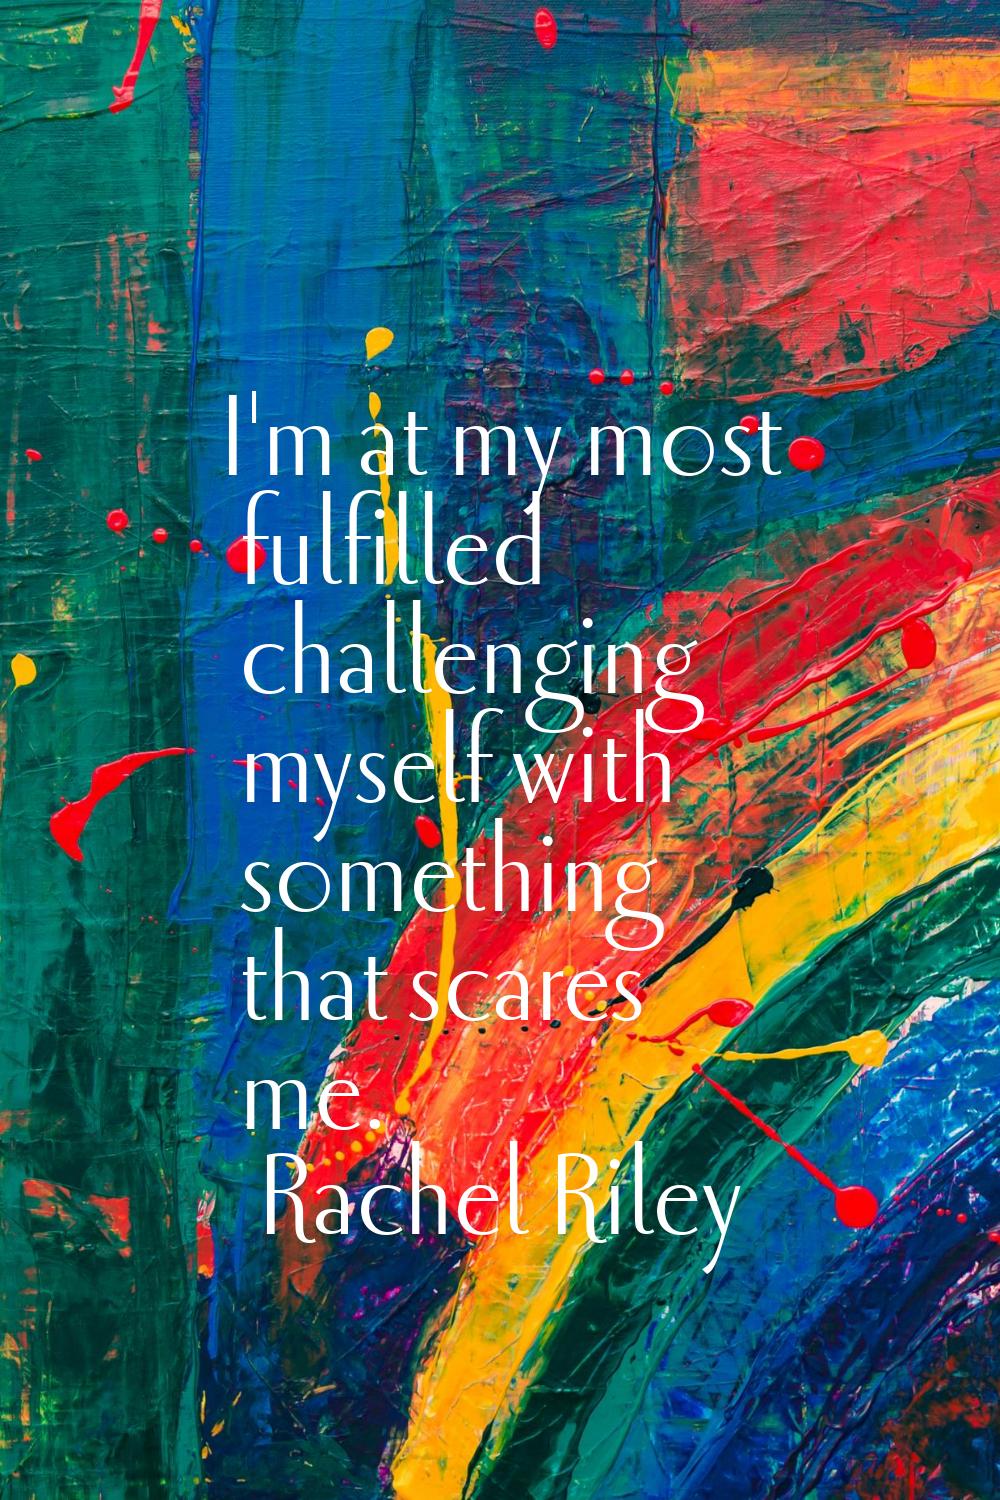 I'm at my most fulfilled challenging myself with something that scares me.